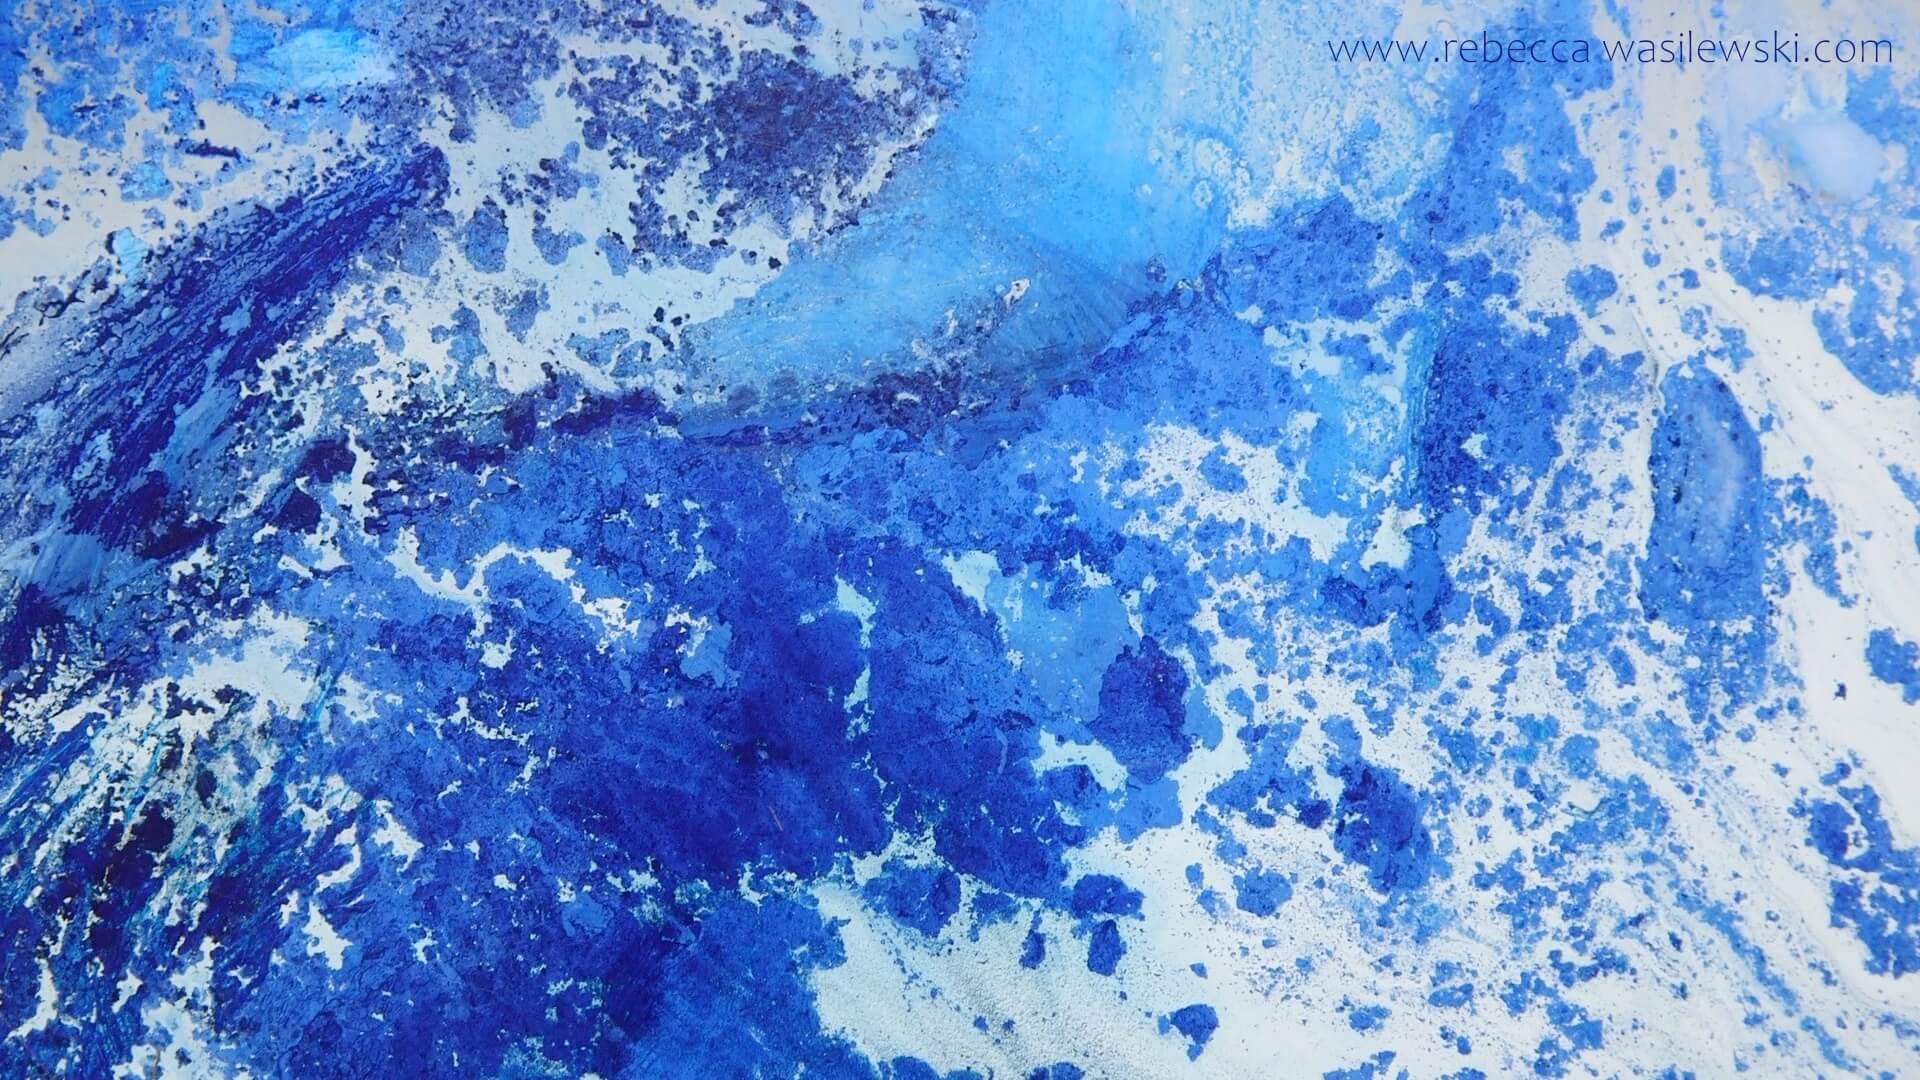 A painting of splashing blue and white water